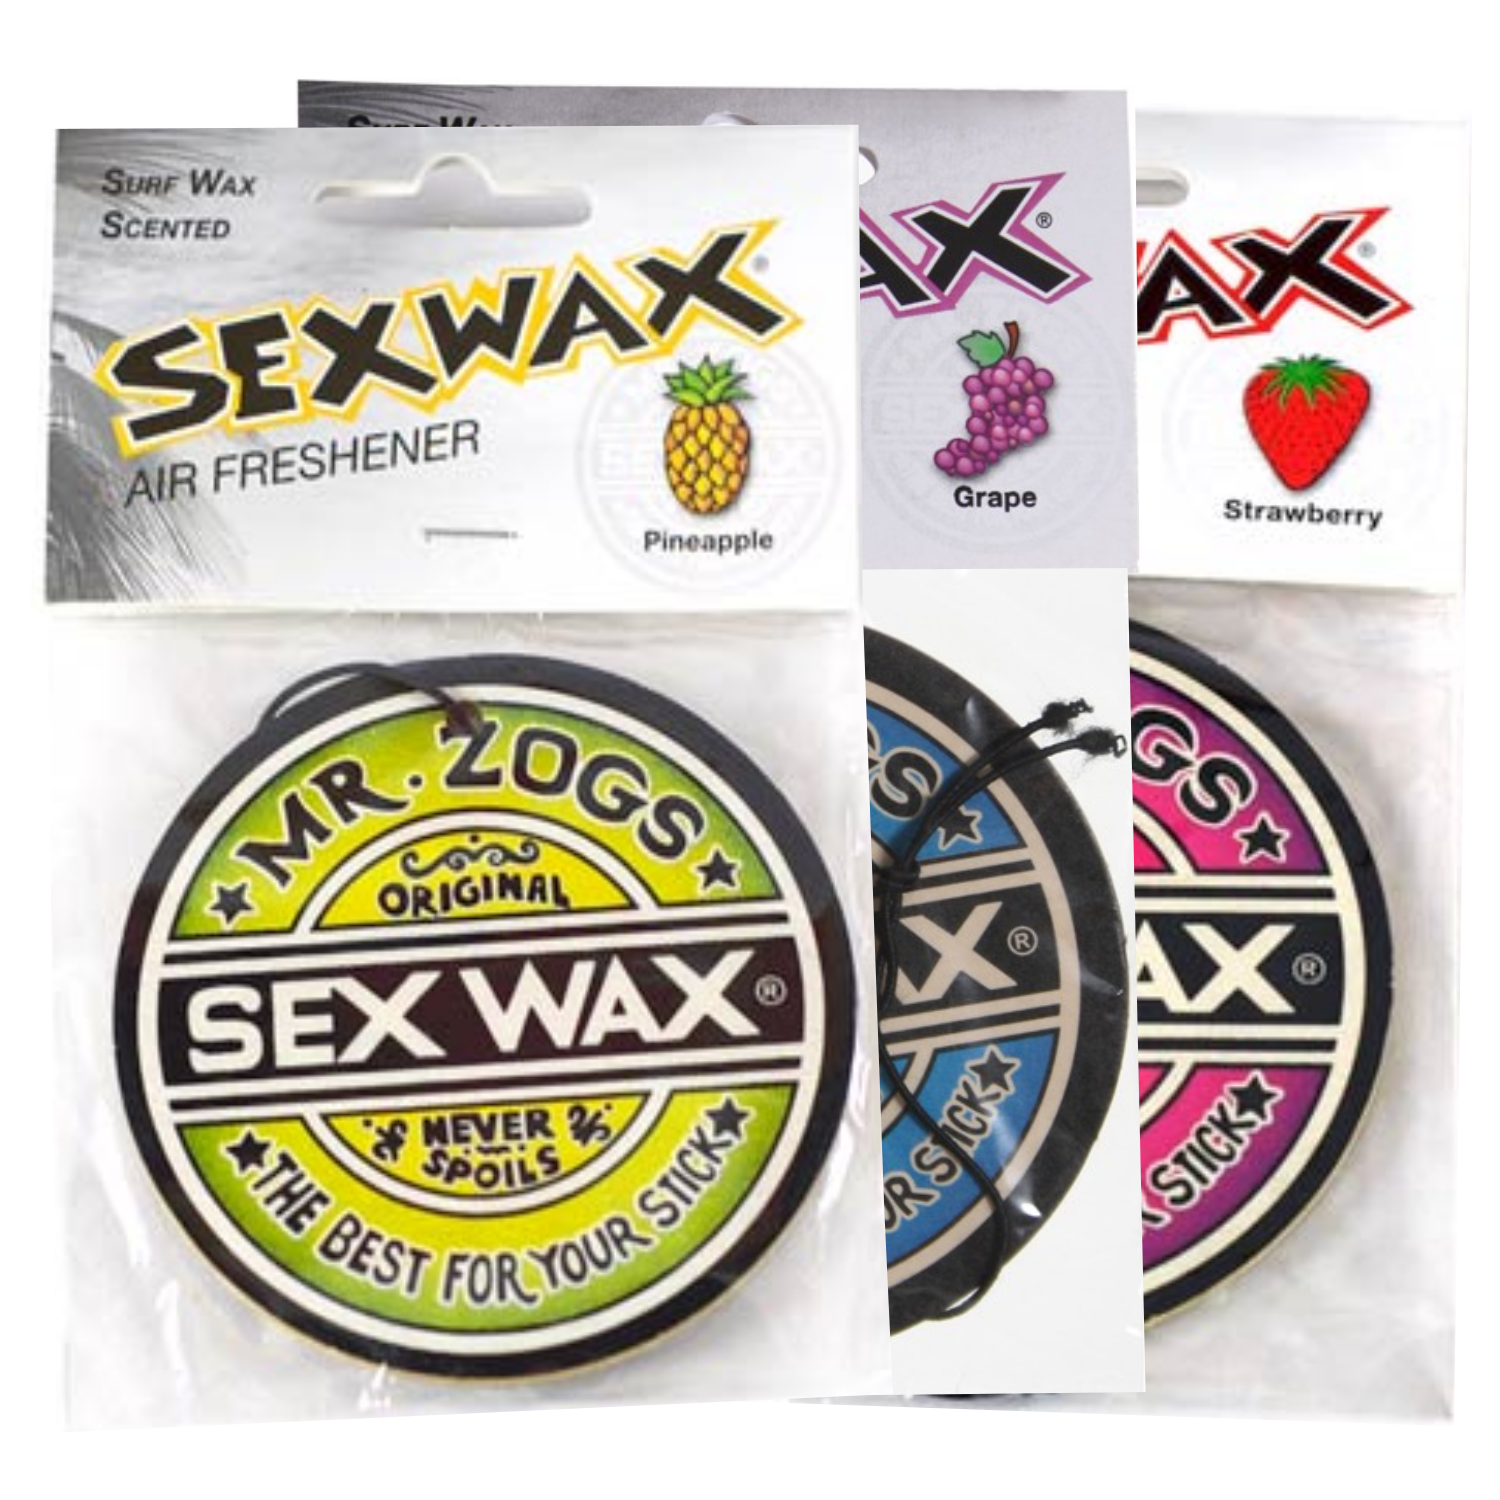 SexWax Coconut Car Freshener from Mr. Zogs.